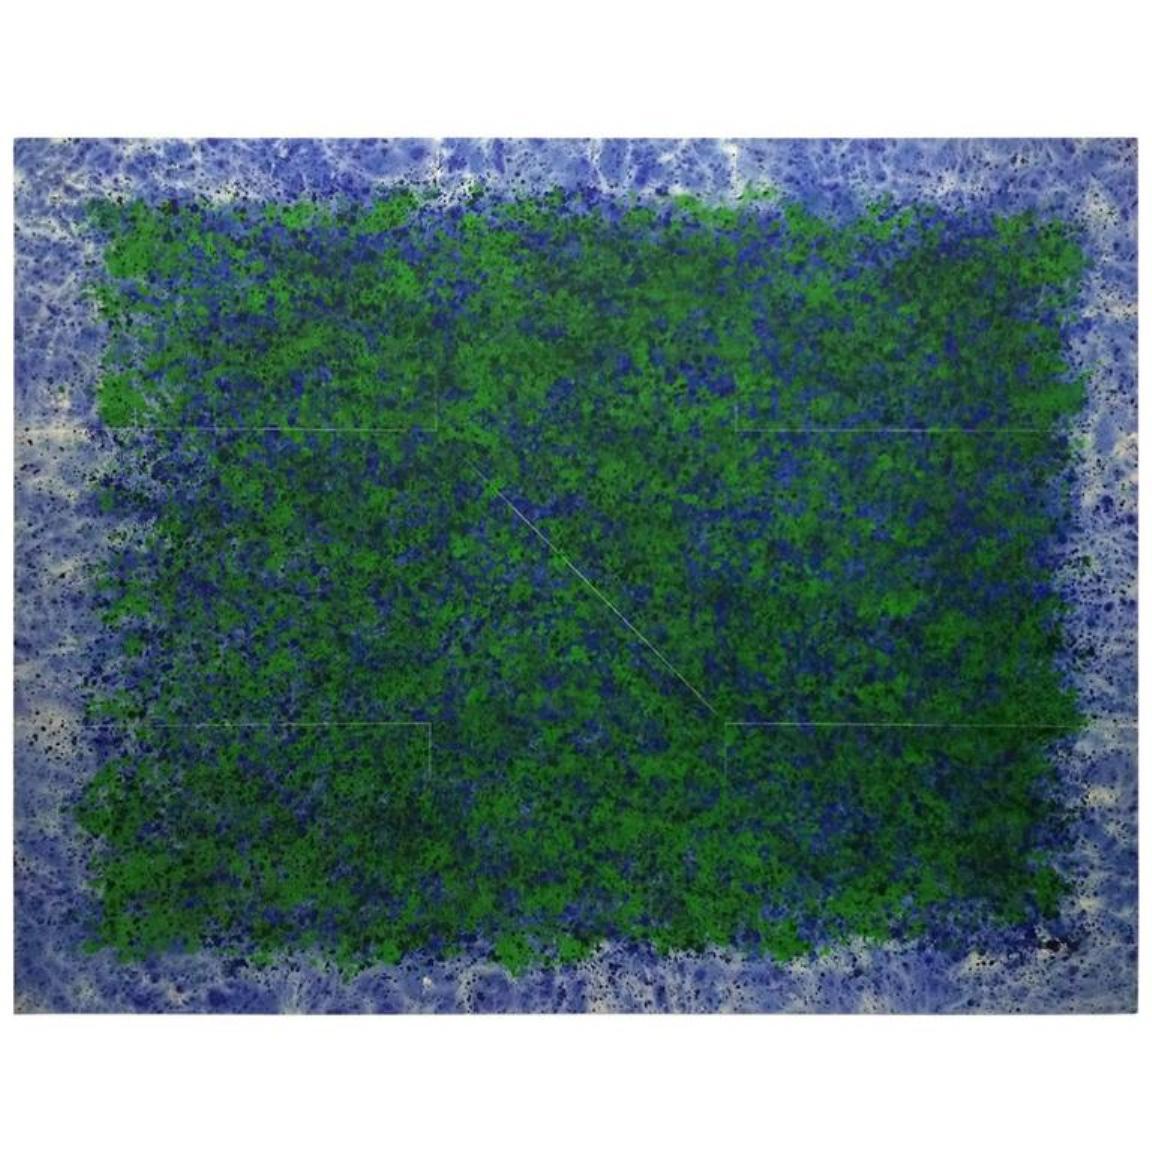 This modernist abstract painting is part of the color field movement which emerged out of the late 1940s in the United States. The edges are blue and white and frame the center, which is contrasting blue and green. The space of the picture is